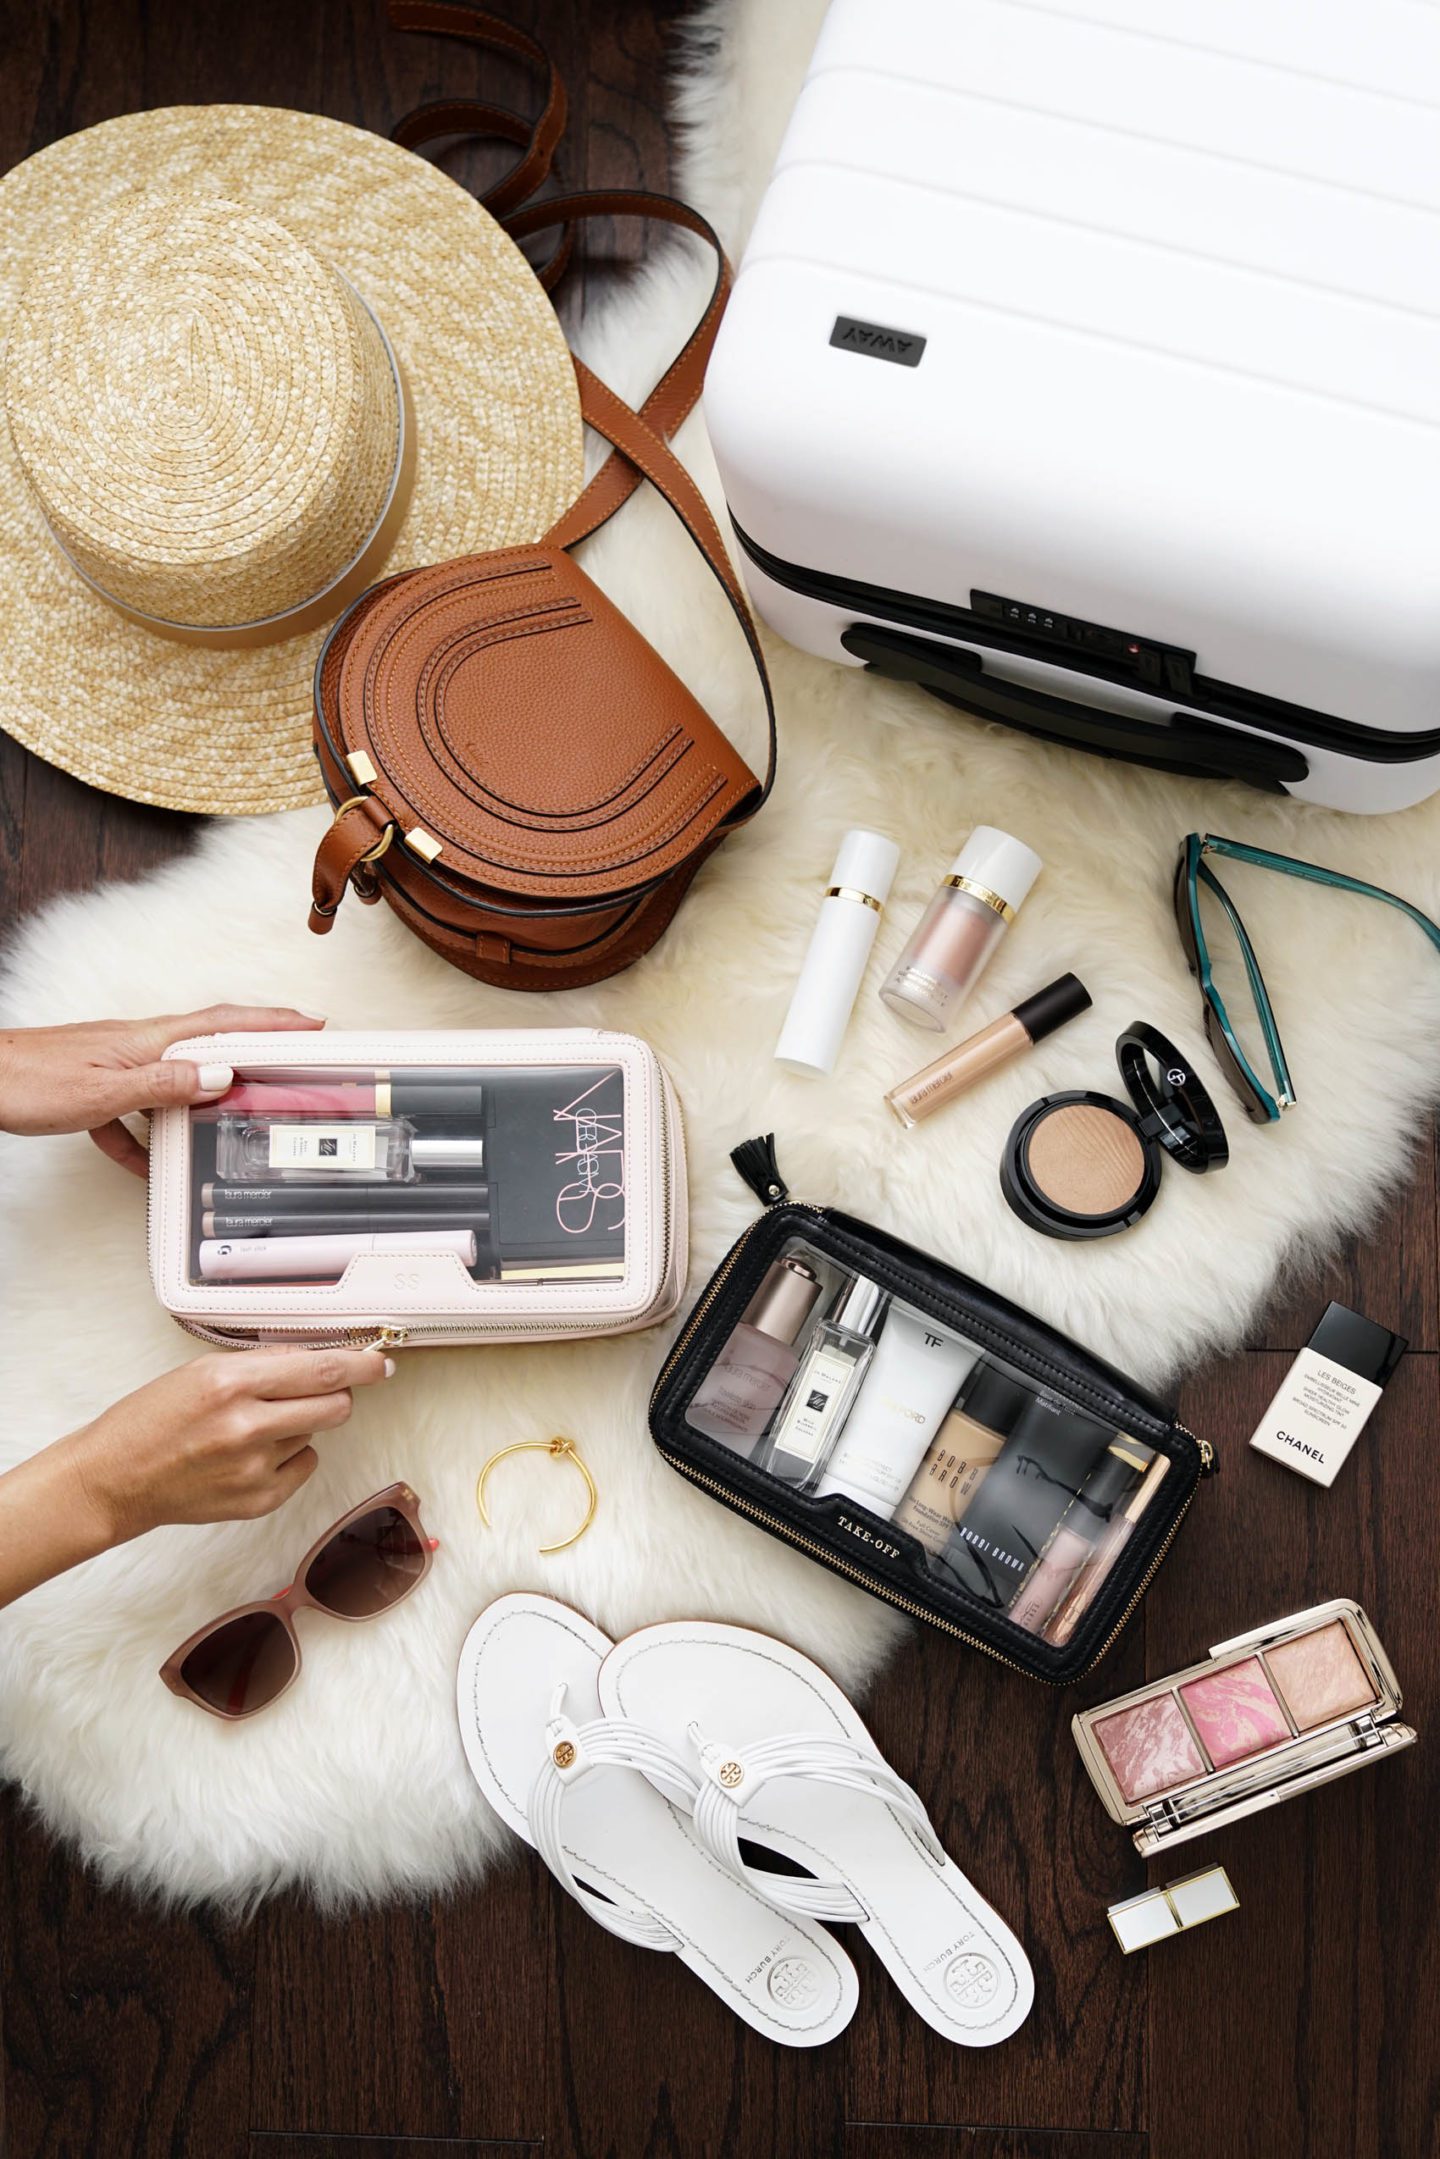 Packing Away Carry On via The Beauty Look Book